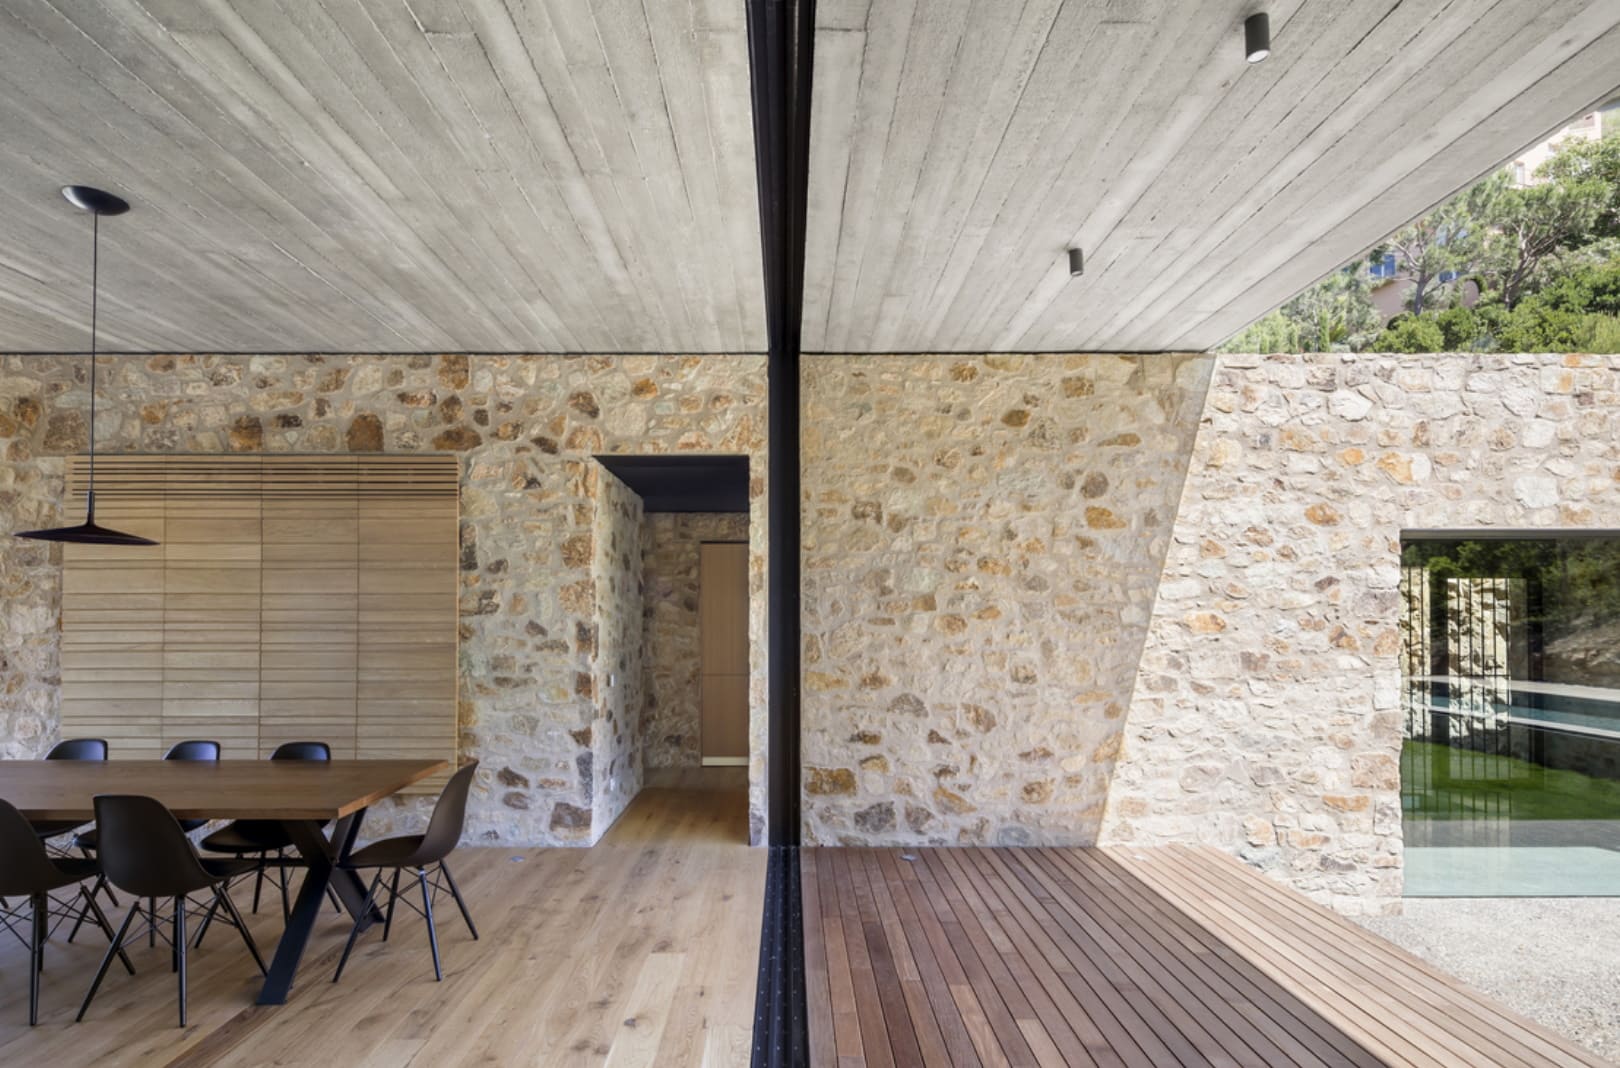 The dining room with a stone wall, opens to the outside, featuring a minimalist window frame and modern design